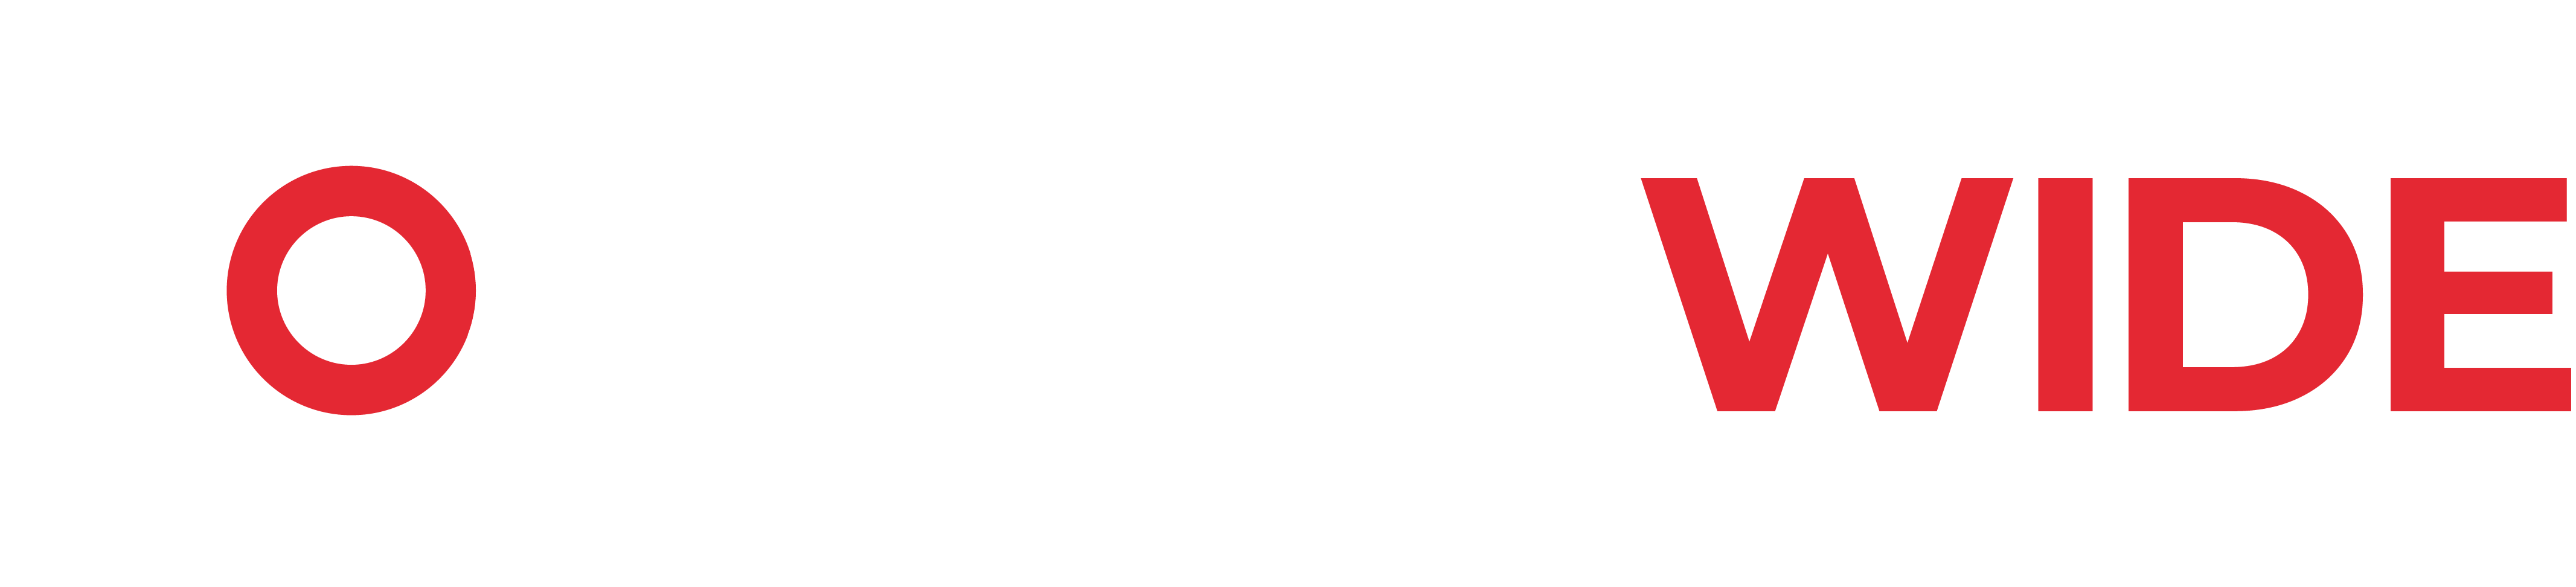 Countrywide Mobility Shop